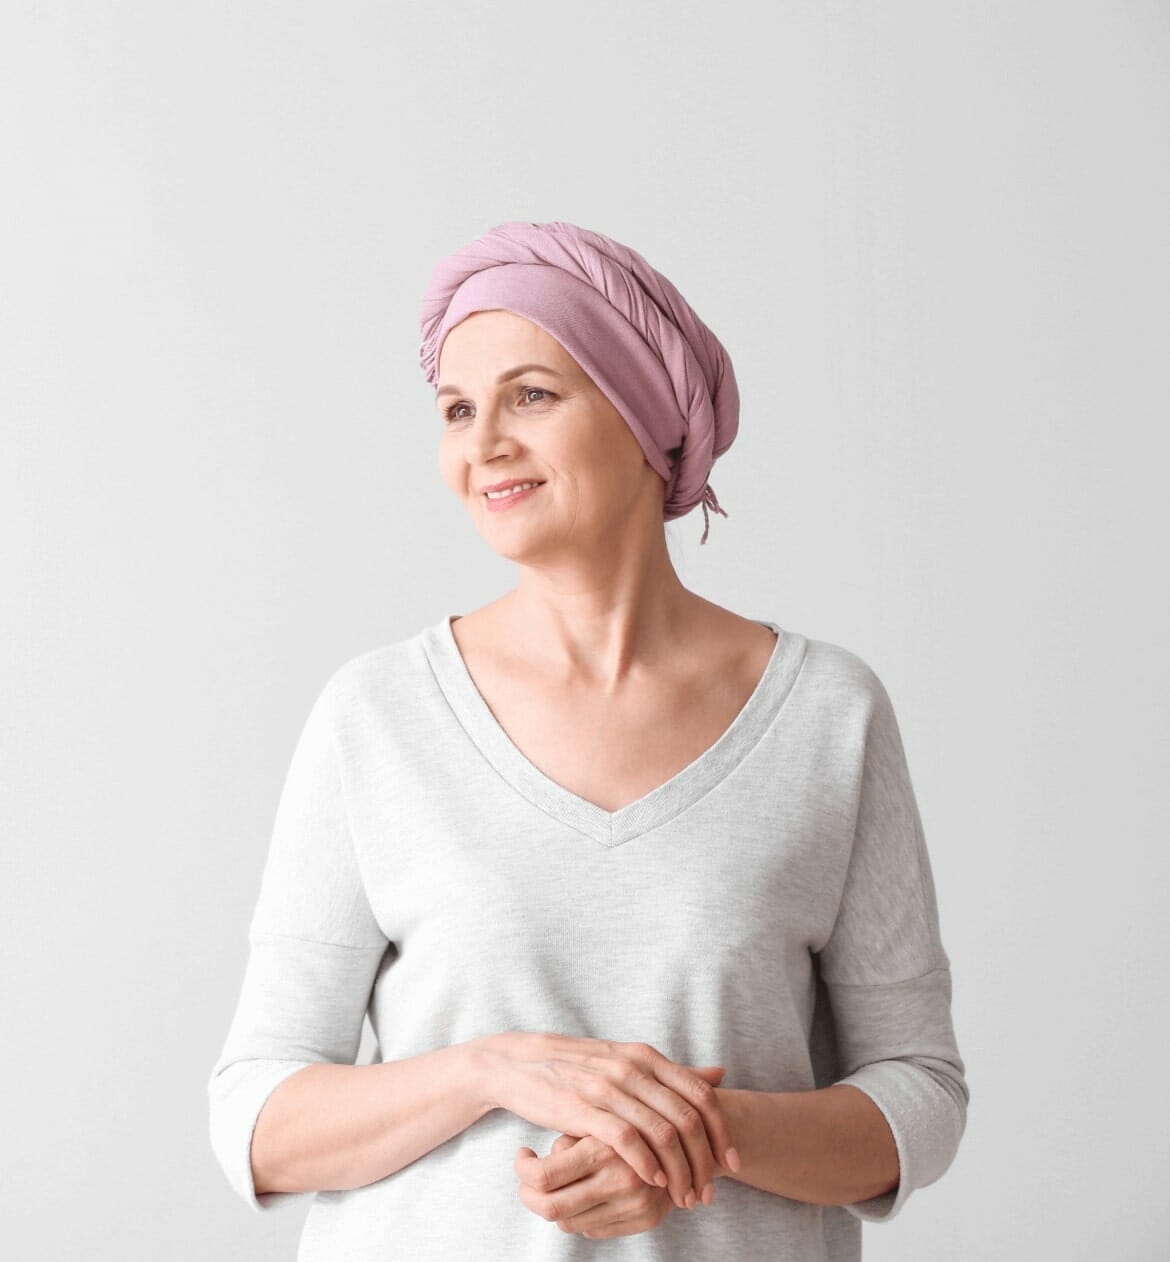 Breast Cancer Financial Assistance